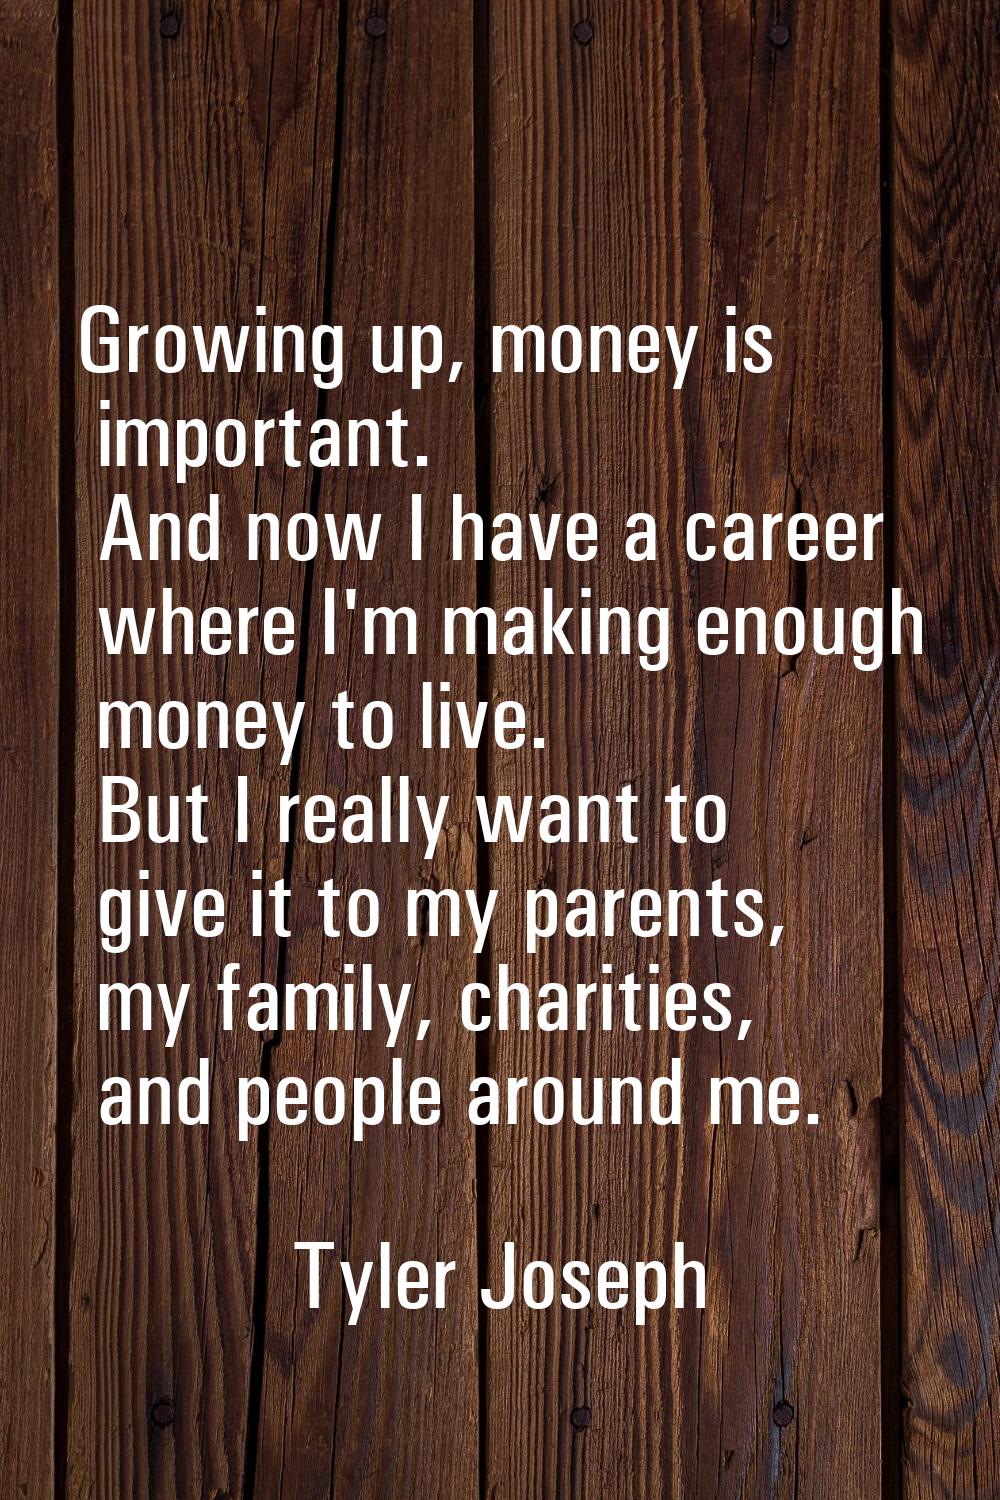 Growing up, money is important. And now I have a career where I'm making enough money to live. But 